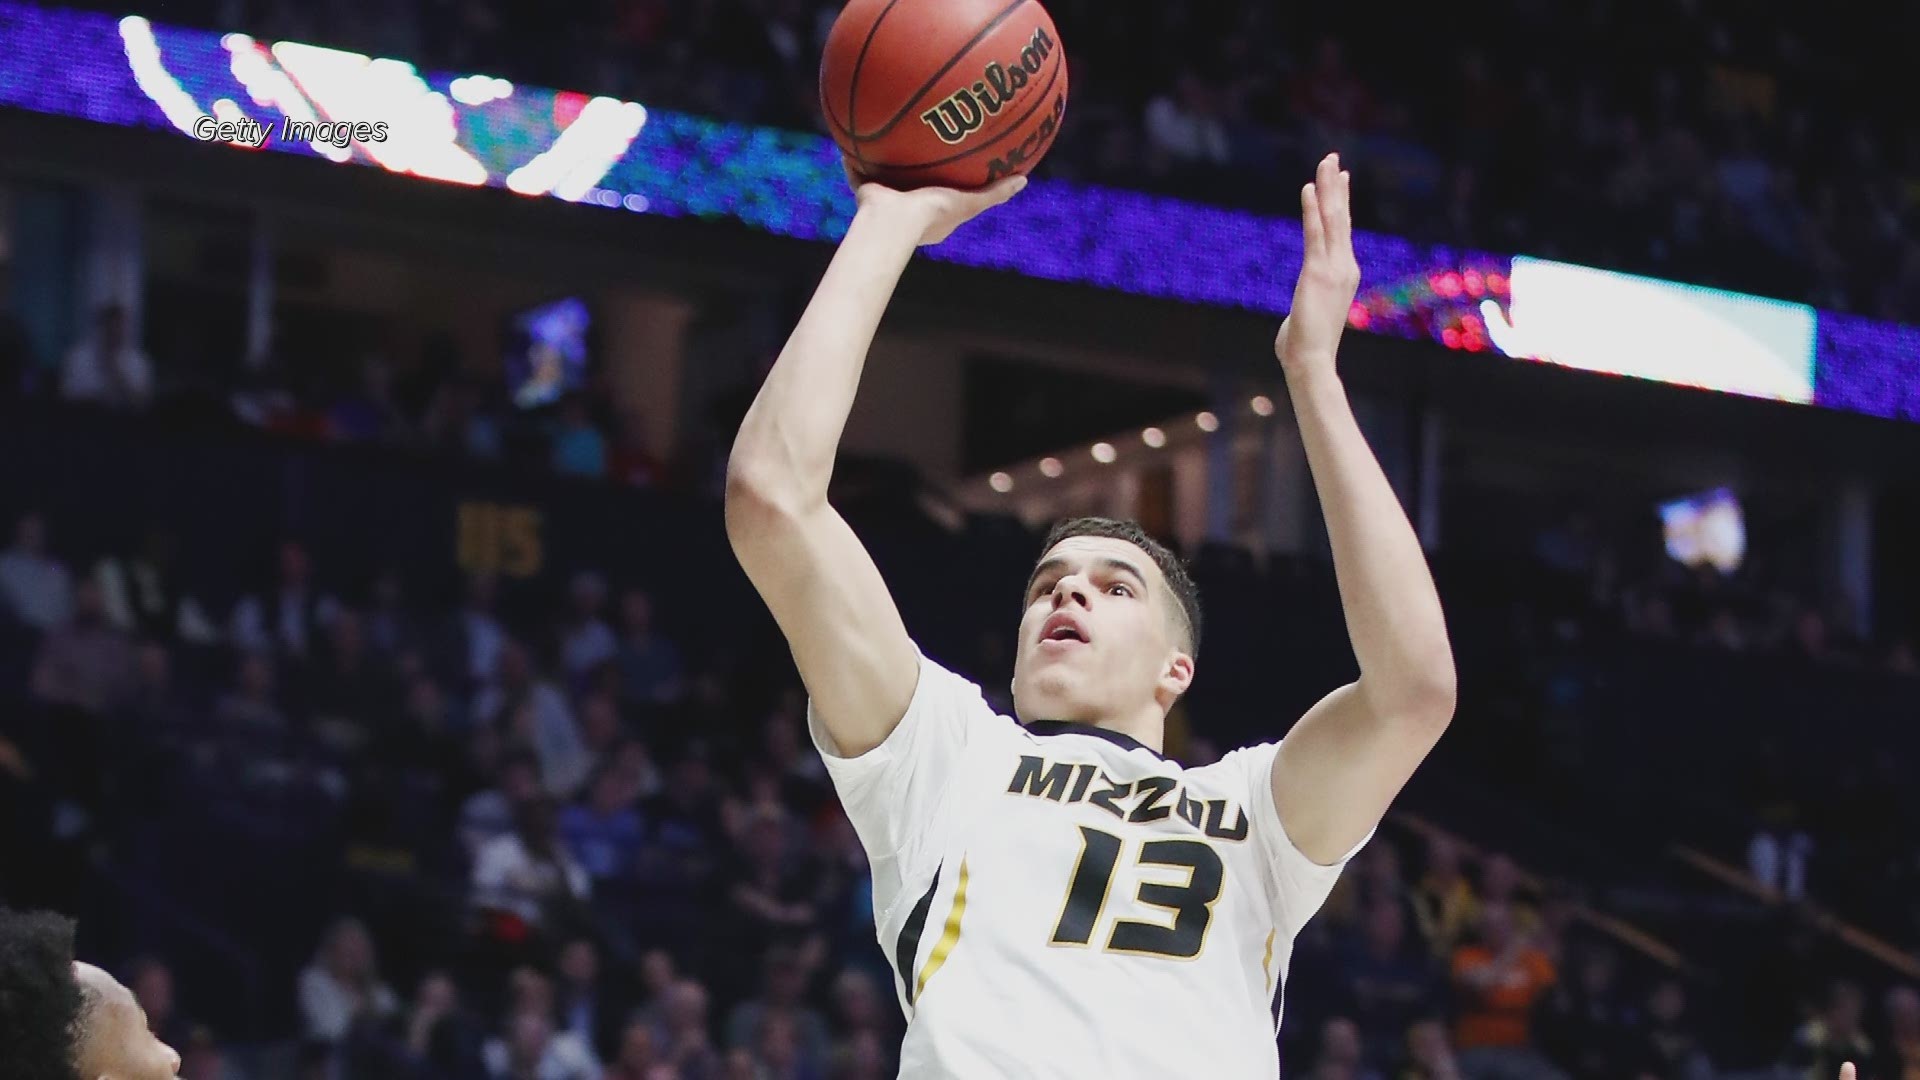 NBA Draft buzz: Cavs may look to trade up for Michael Porter Jr.